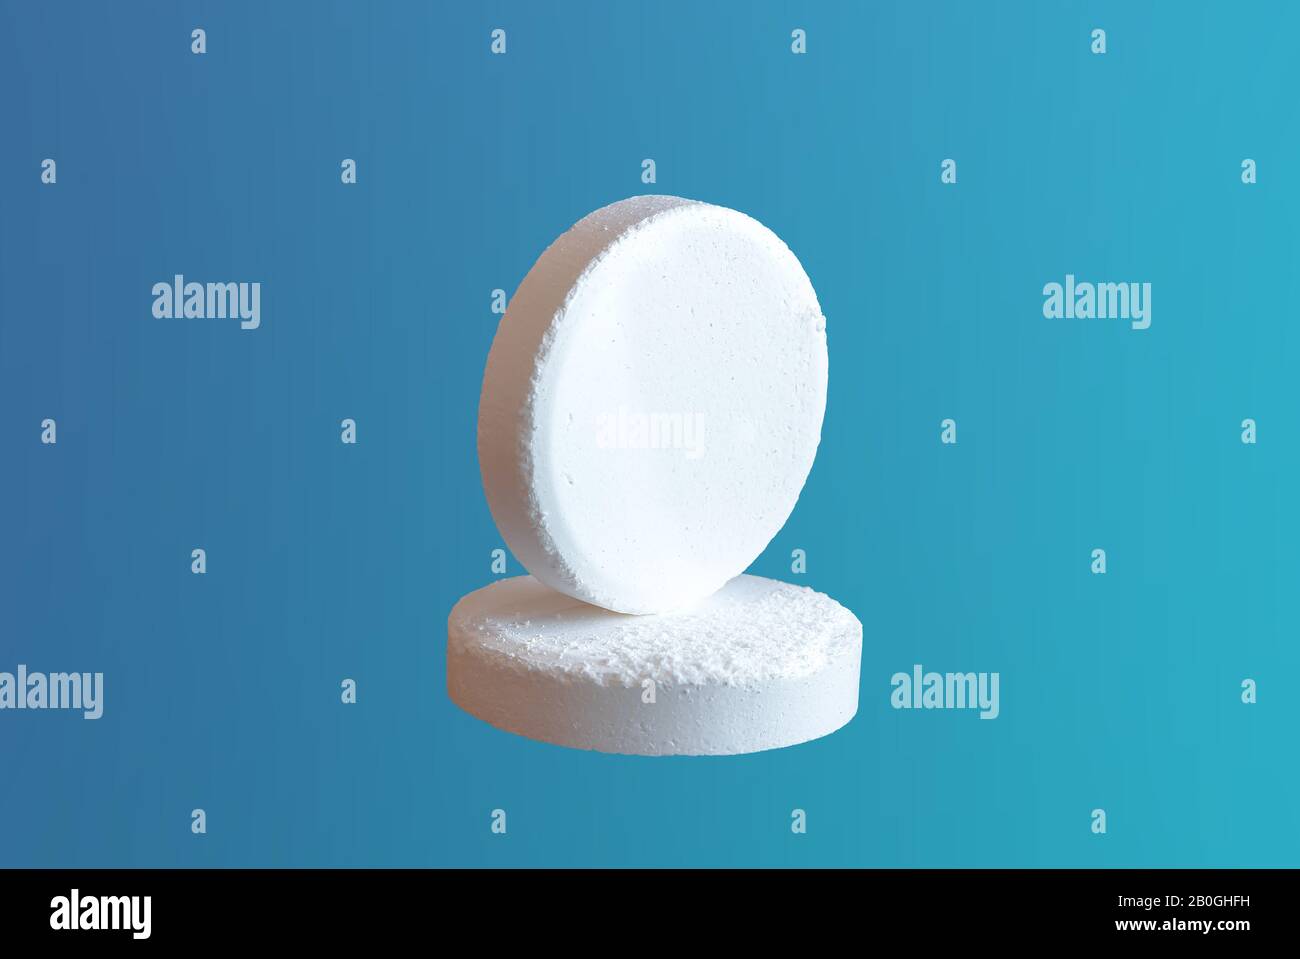 Two tablets on the blue background Stock Photo